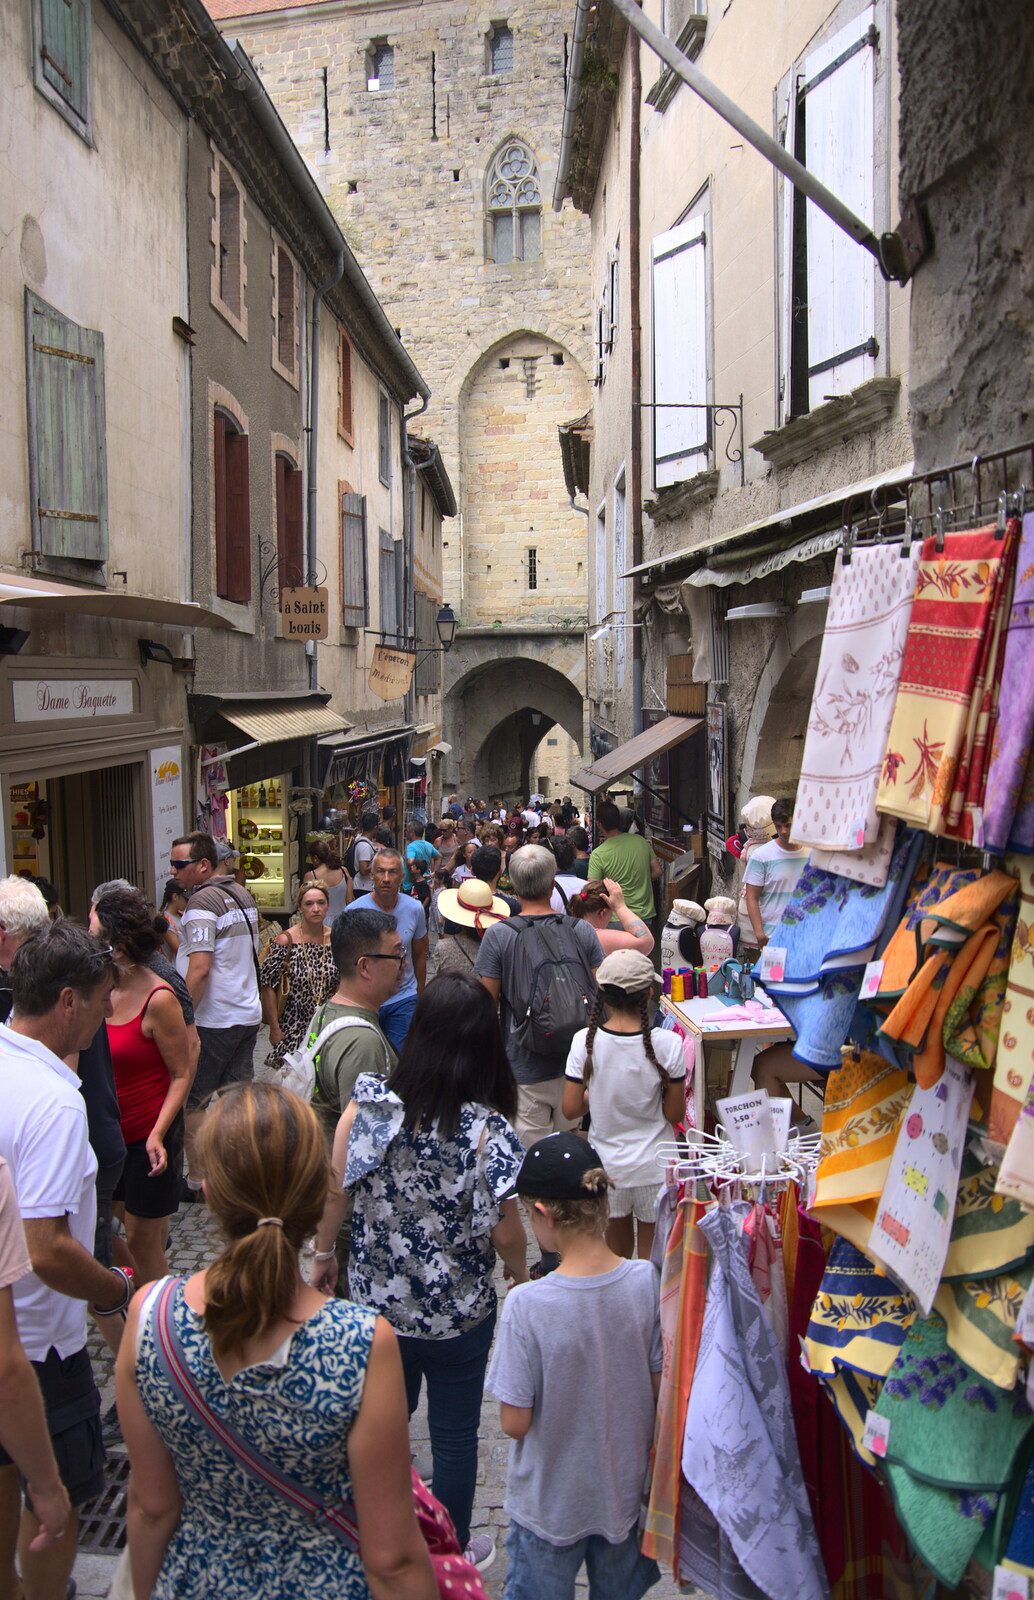 The crowded streets, near the Porte Narbonnaise from A Trip to Carcassonne, Aude, France - 8th August 2018